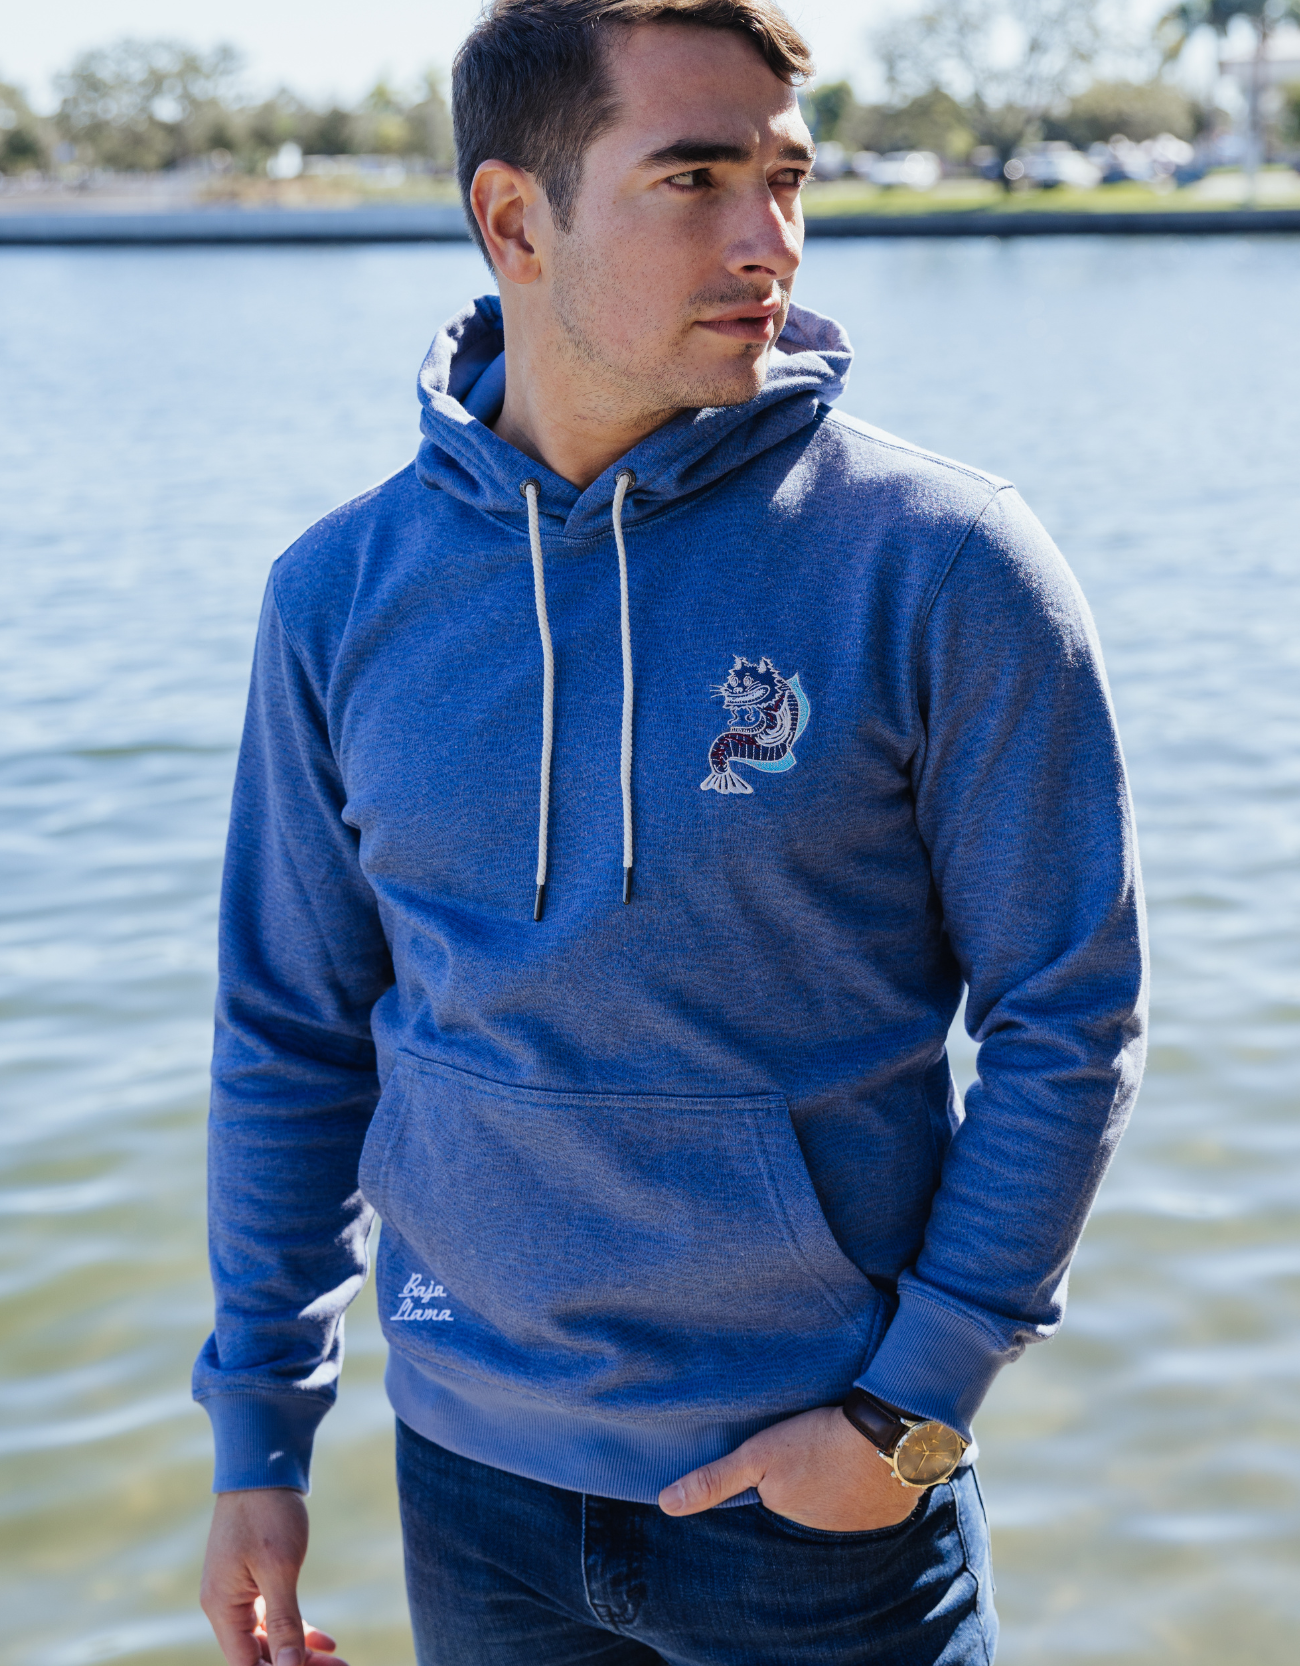 CATFISHED ORGANIC COTTON HOODIE - BLUE by Bajallama